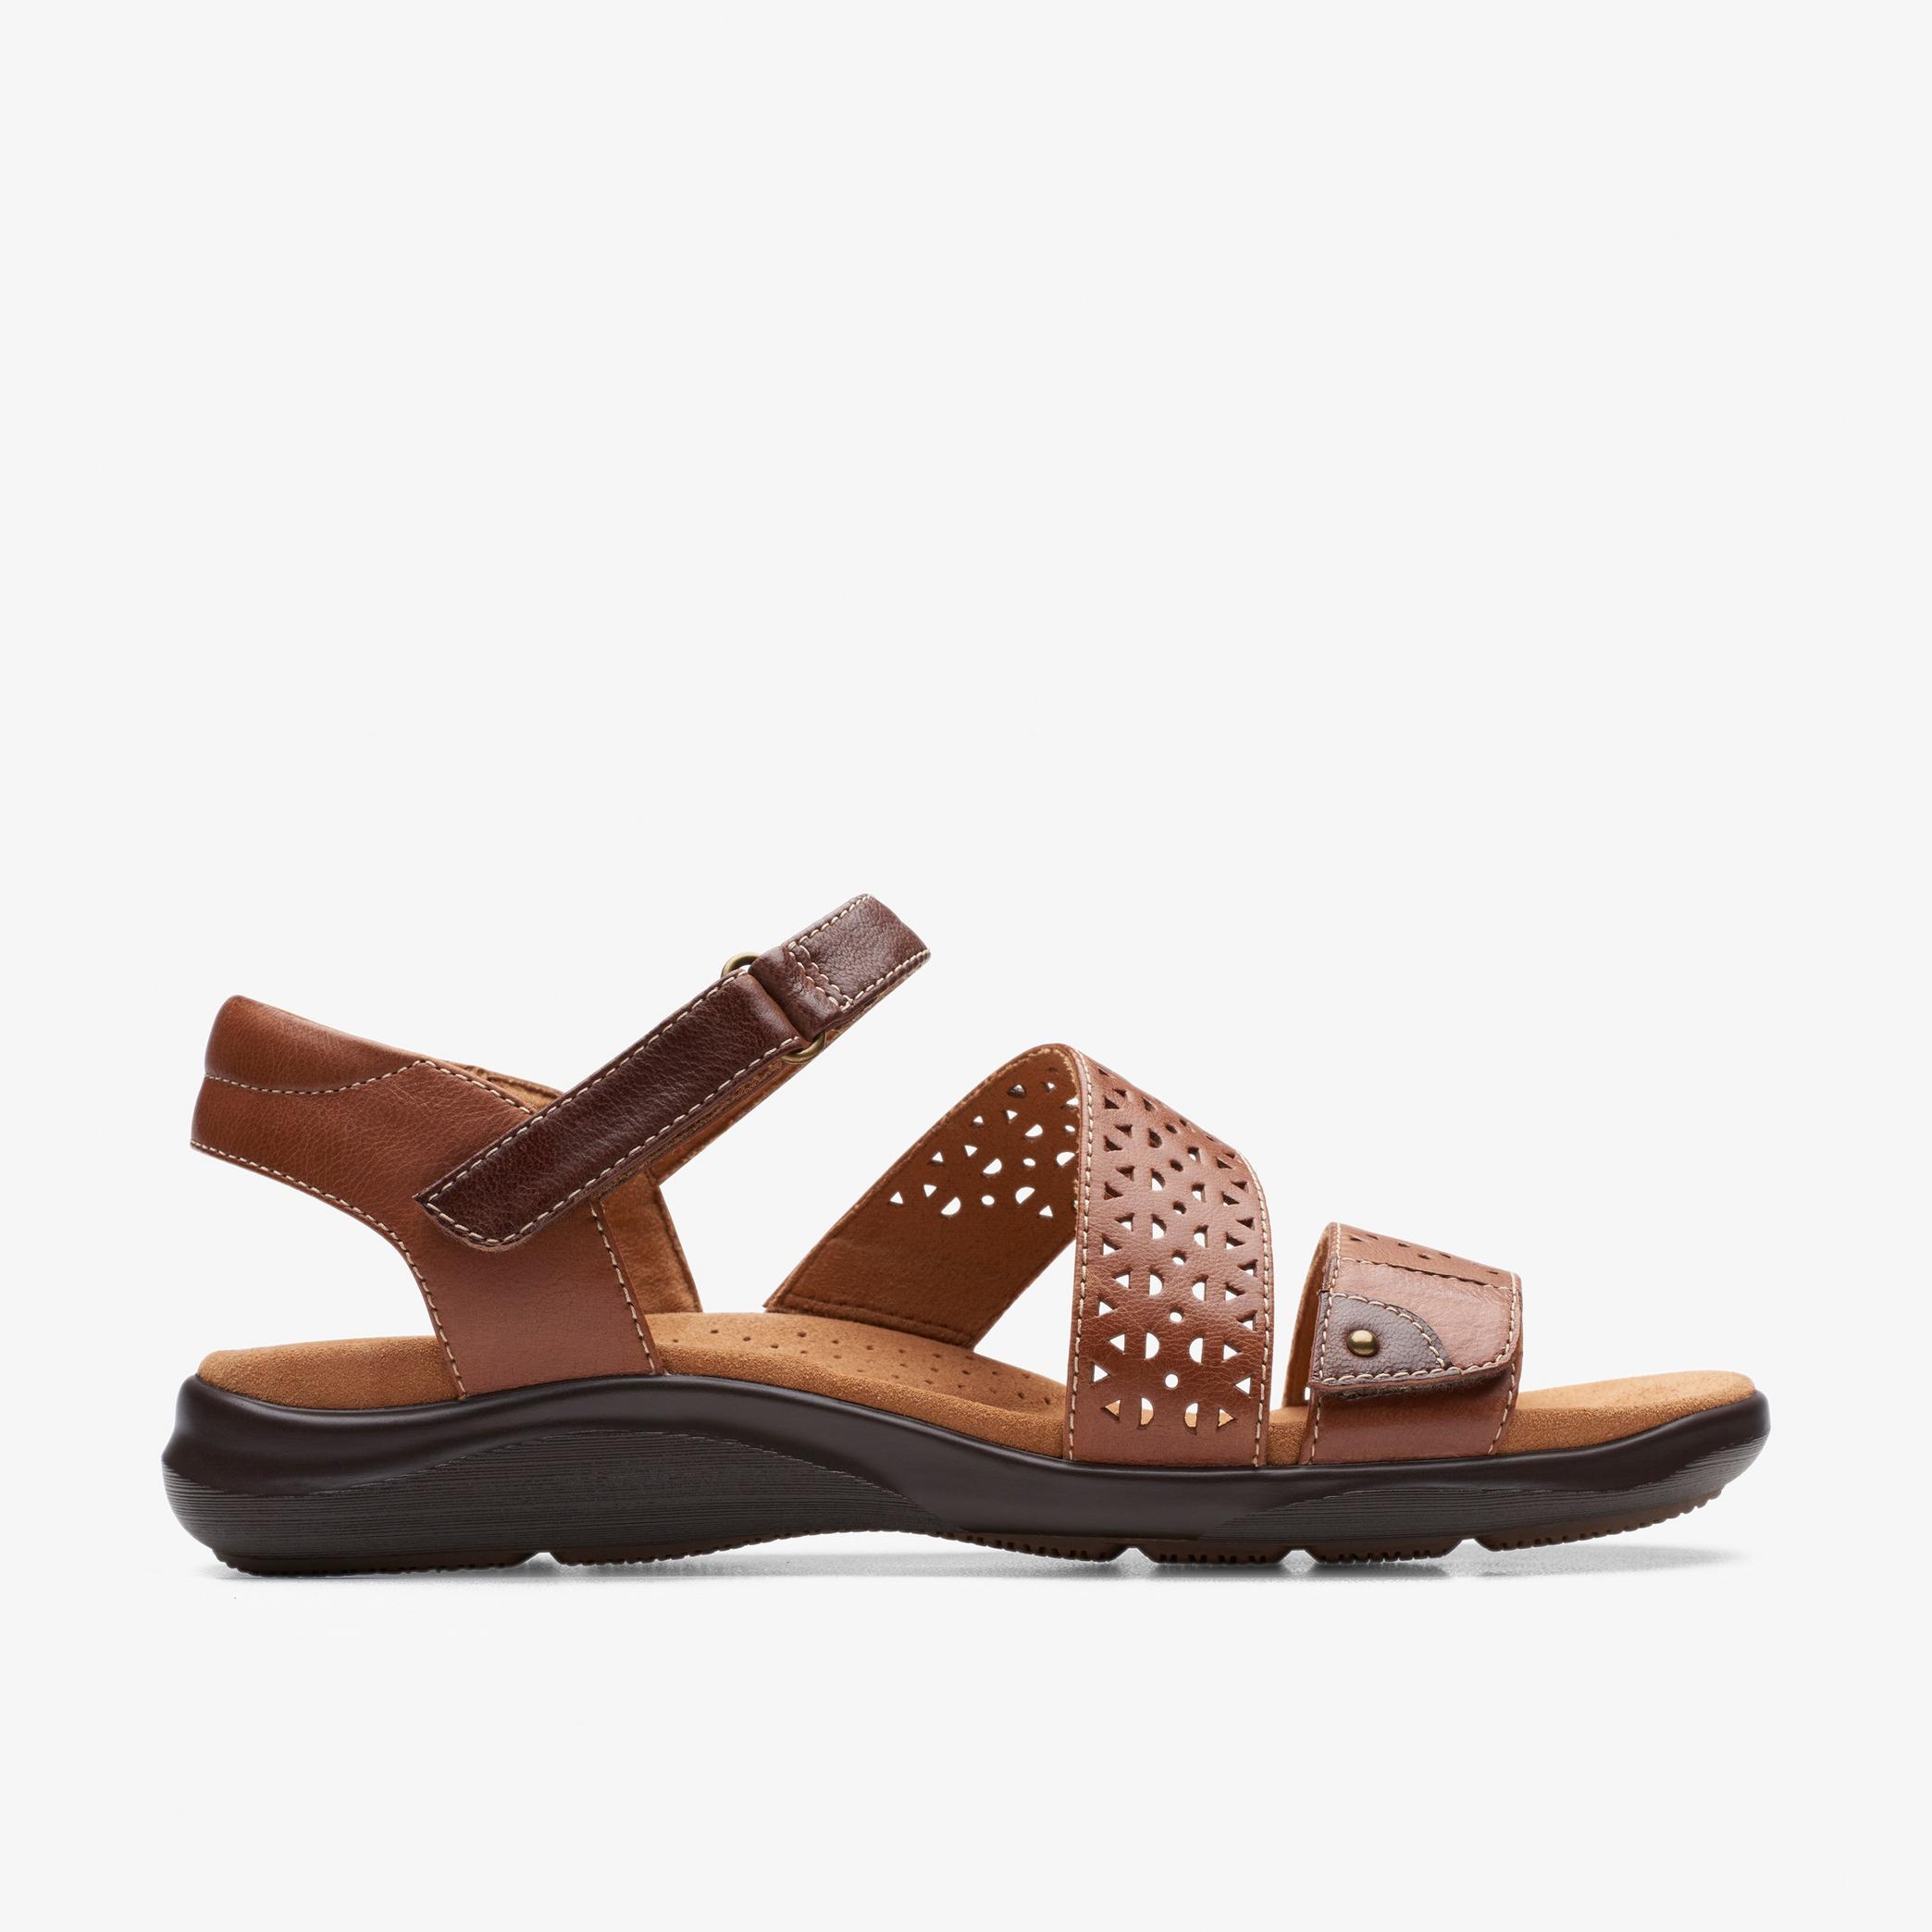 WOMENS Kitly Way Tan Leather Flat Sandals | Clarks US